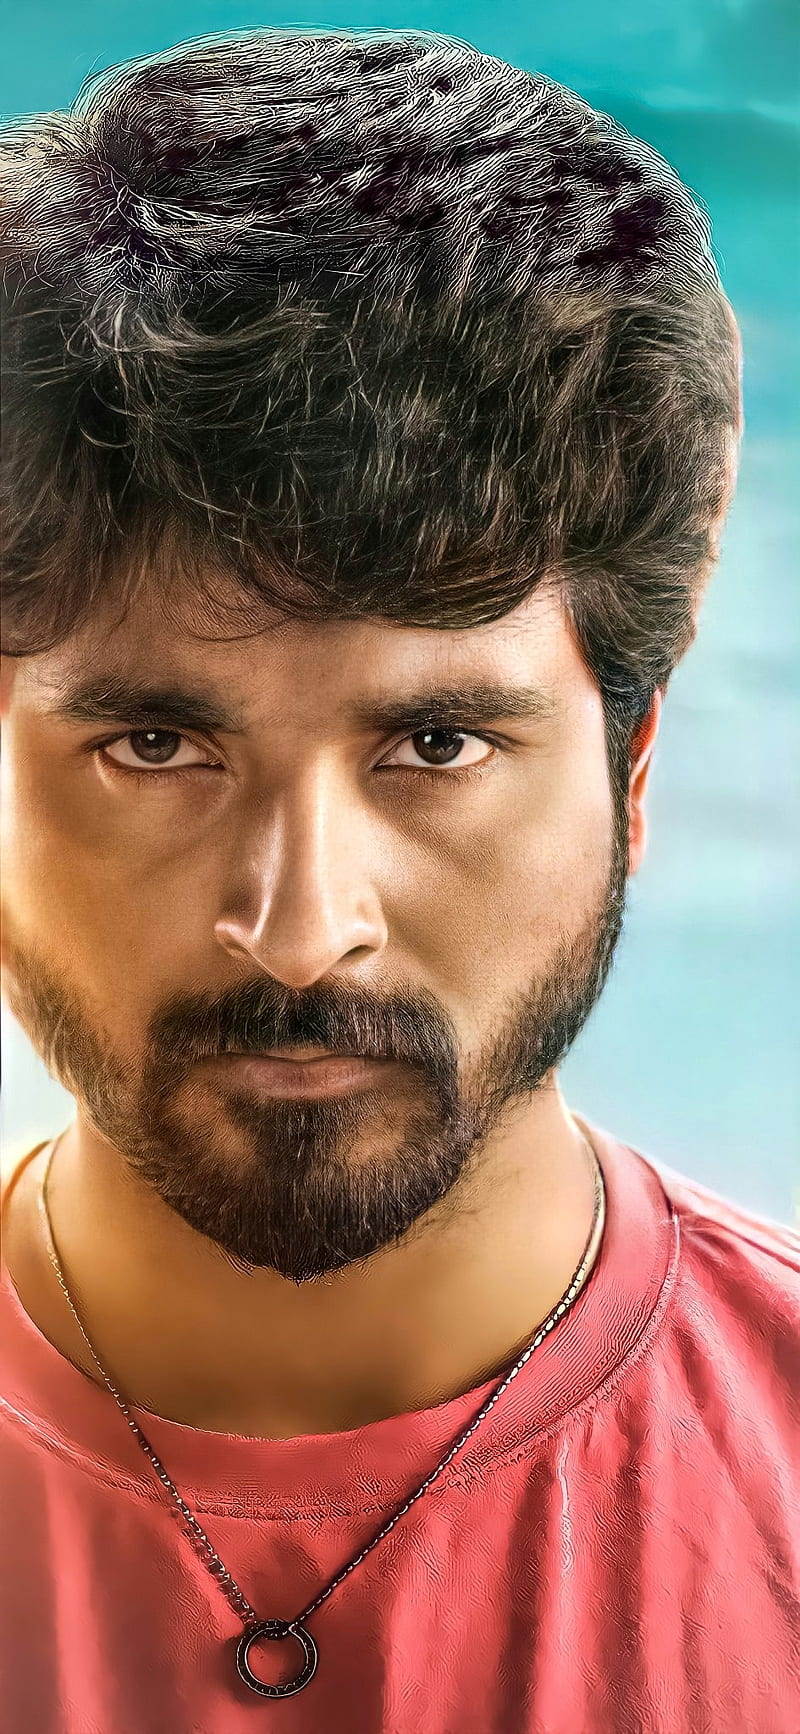 Incredible Compilation of Over 999 Sivakarthikeyan HD Images – Complete Collection in Full 4K Resolution